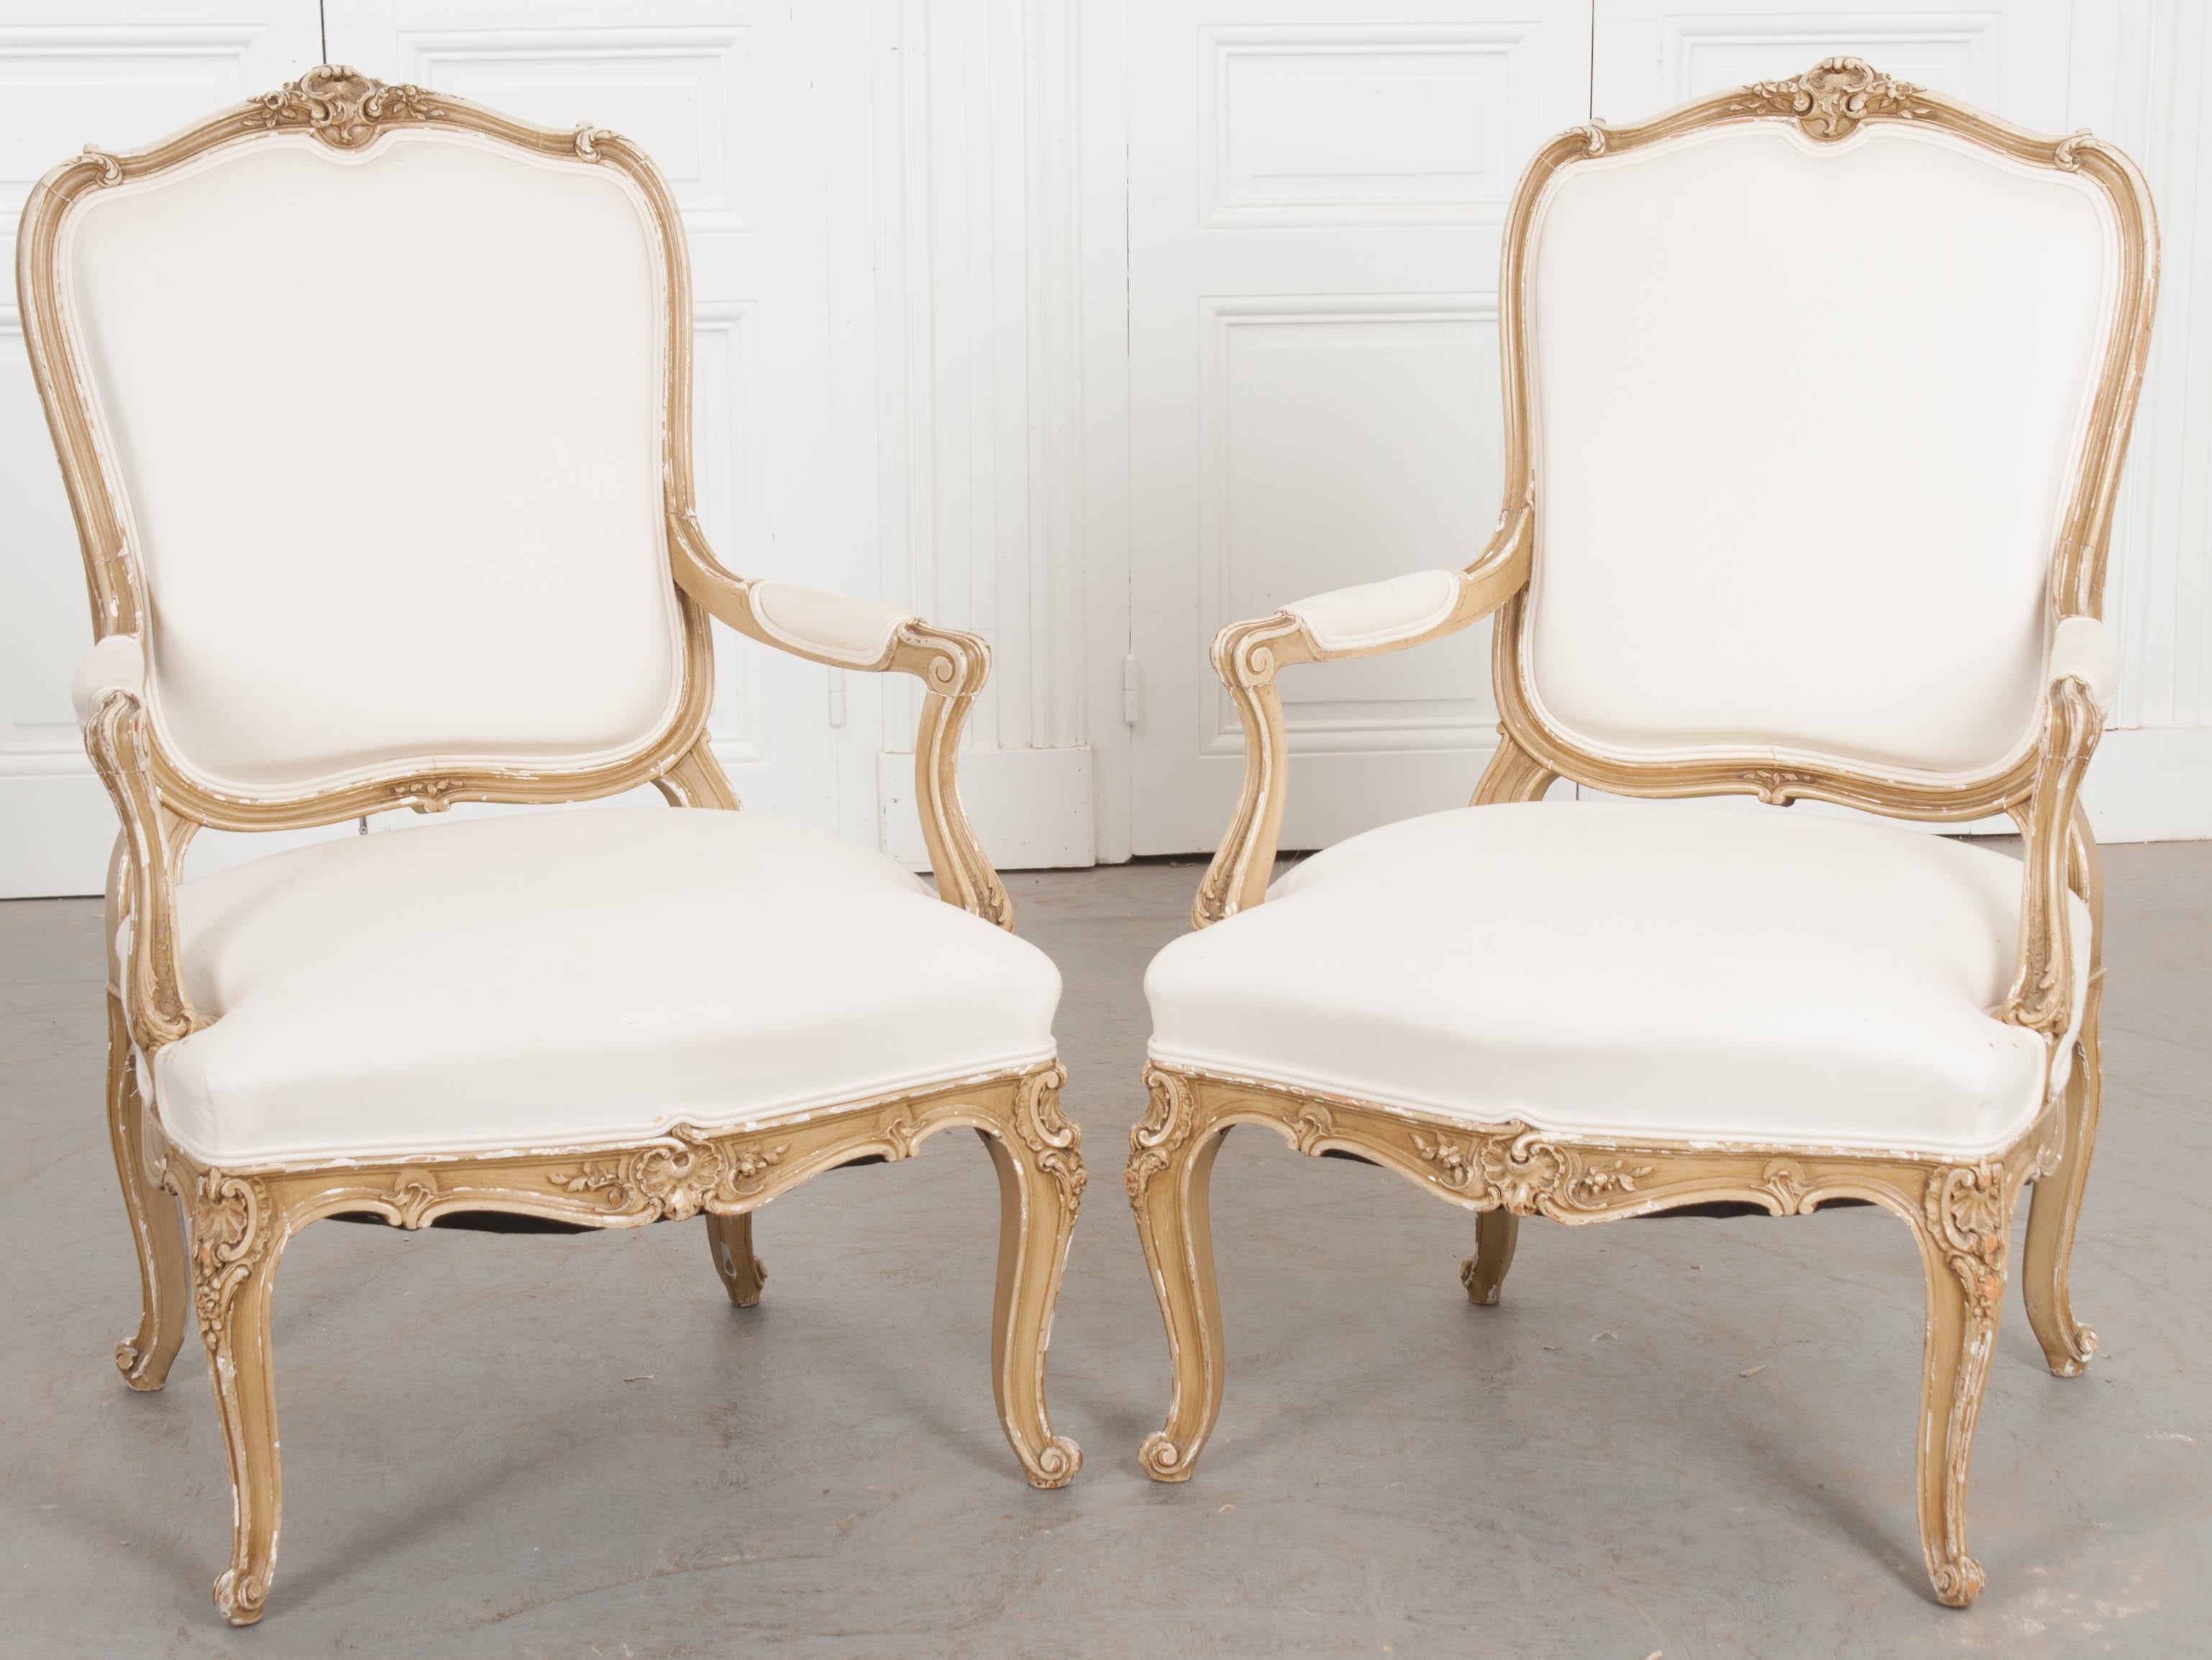 Hand-Carved Pair of 19th Century French Painted Louis XV Fauteuils